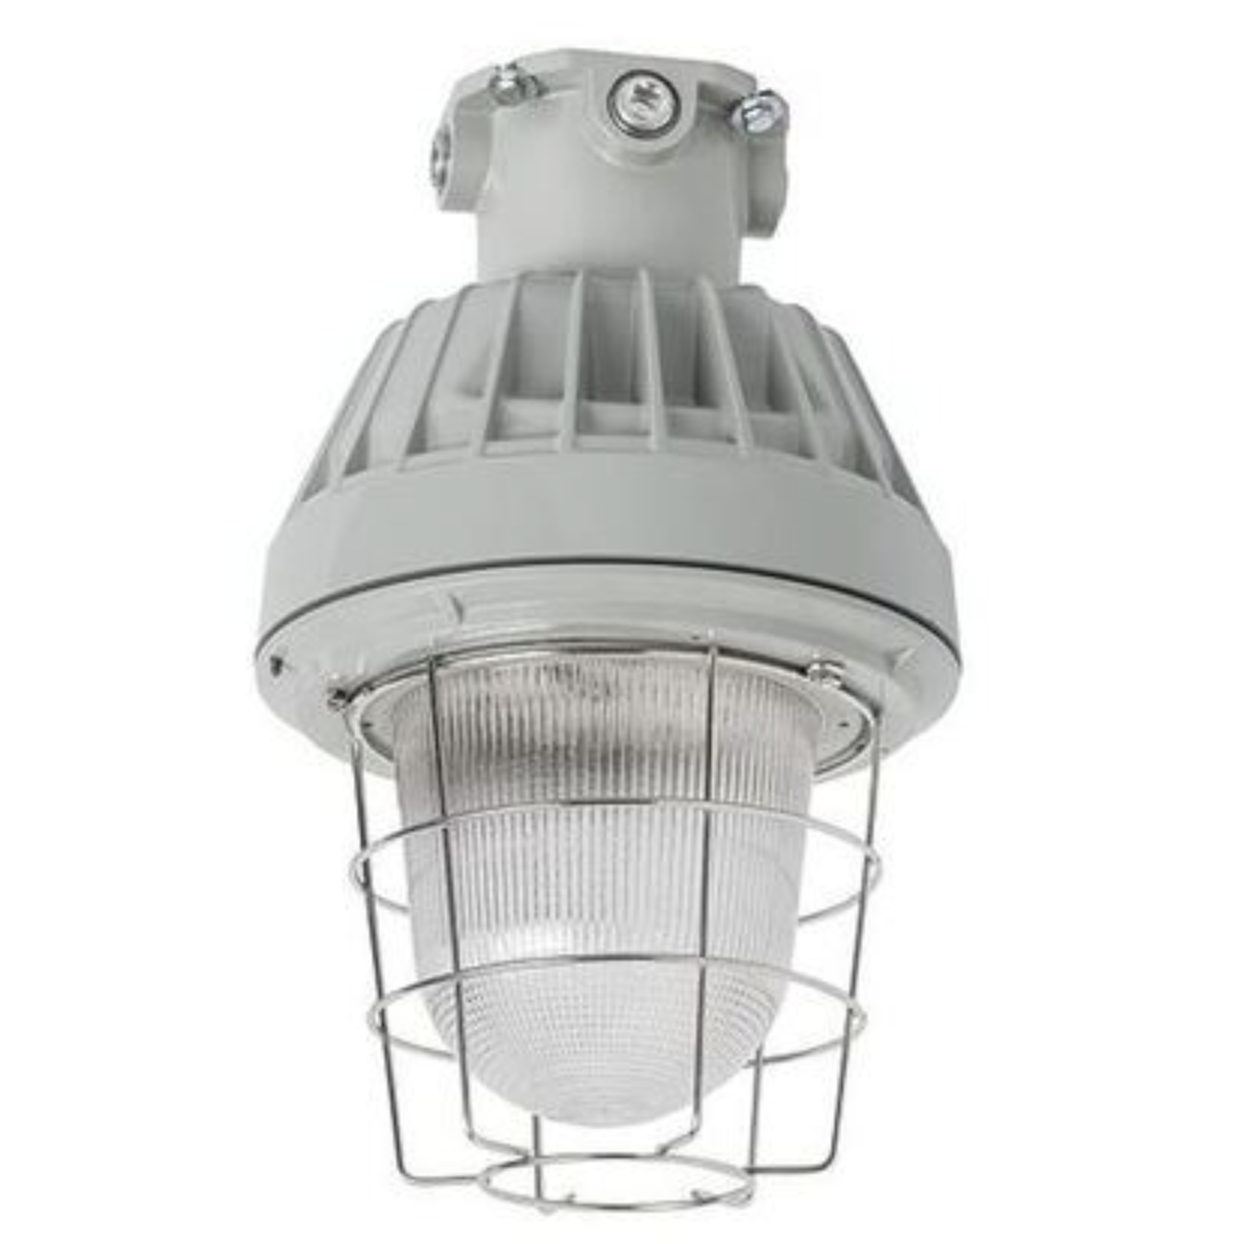 Rig-A-Lite Explosion Proof LED- Architectural Light